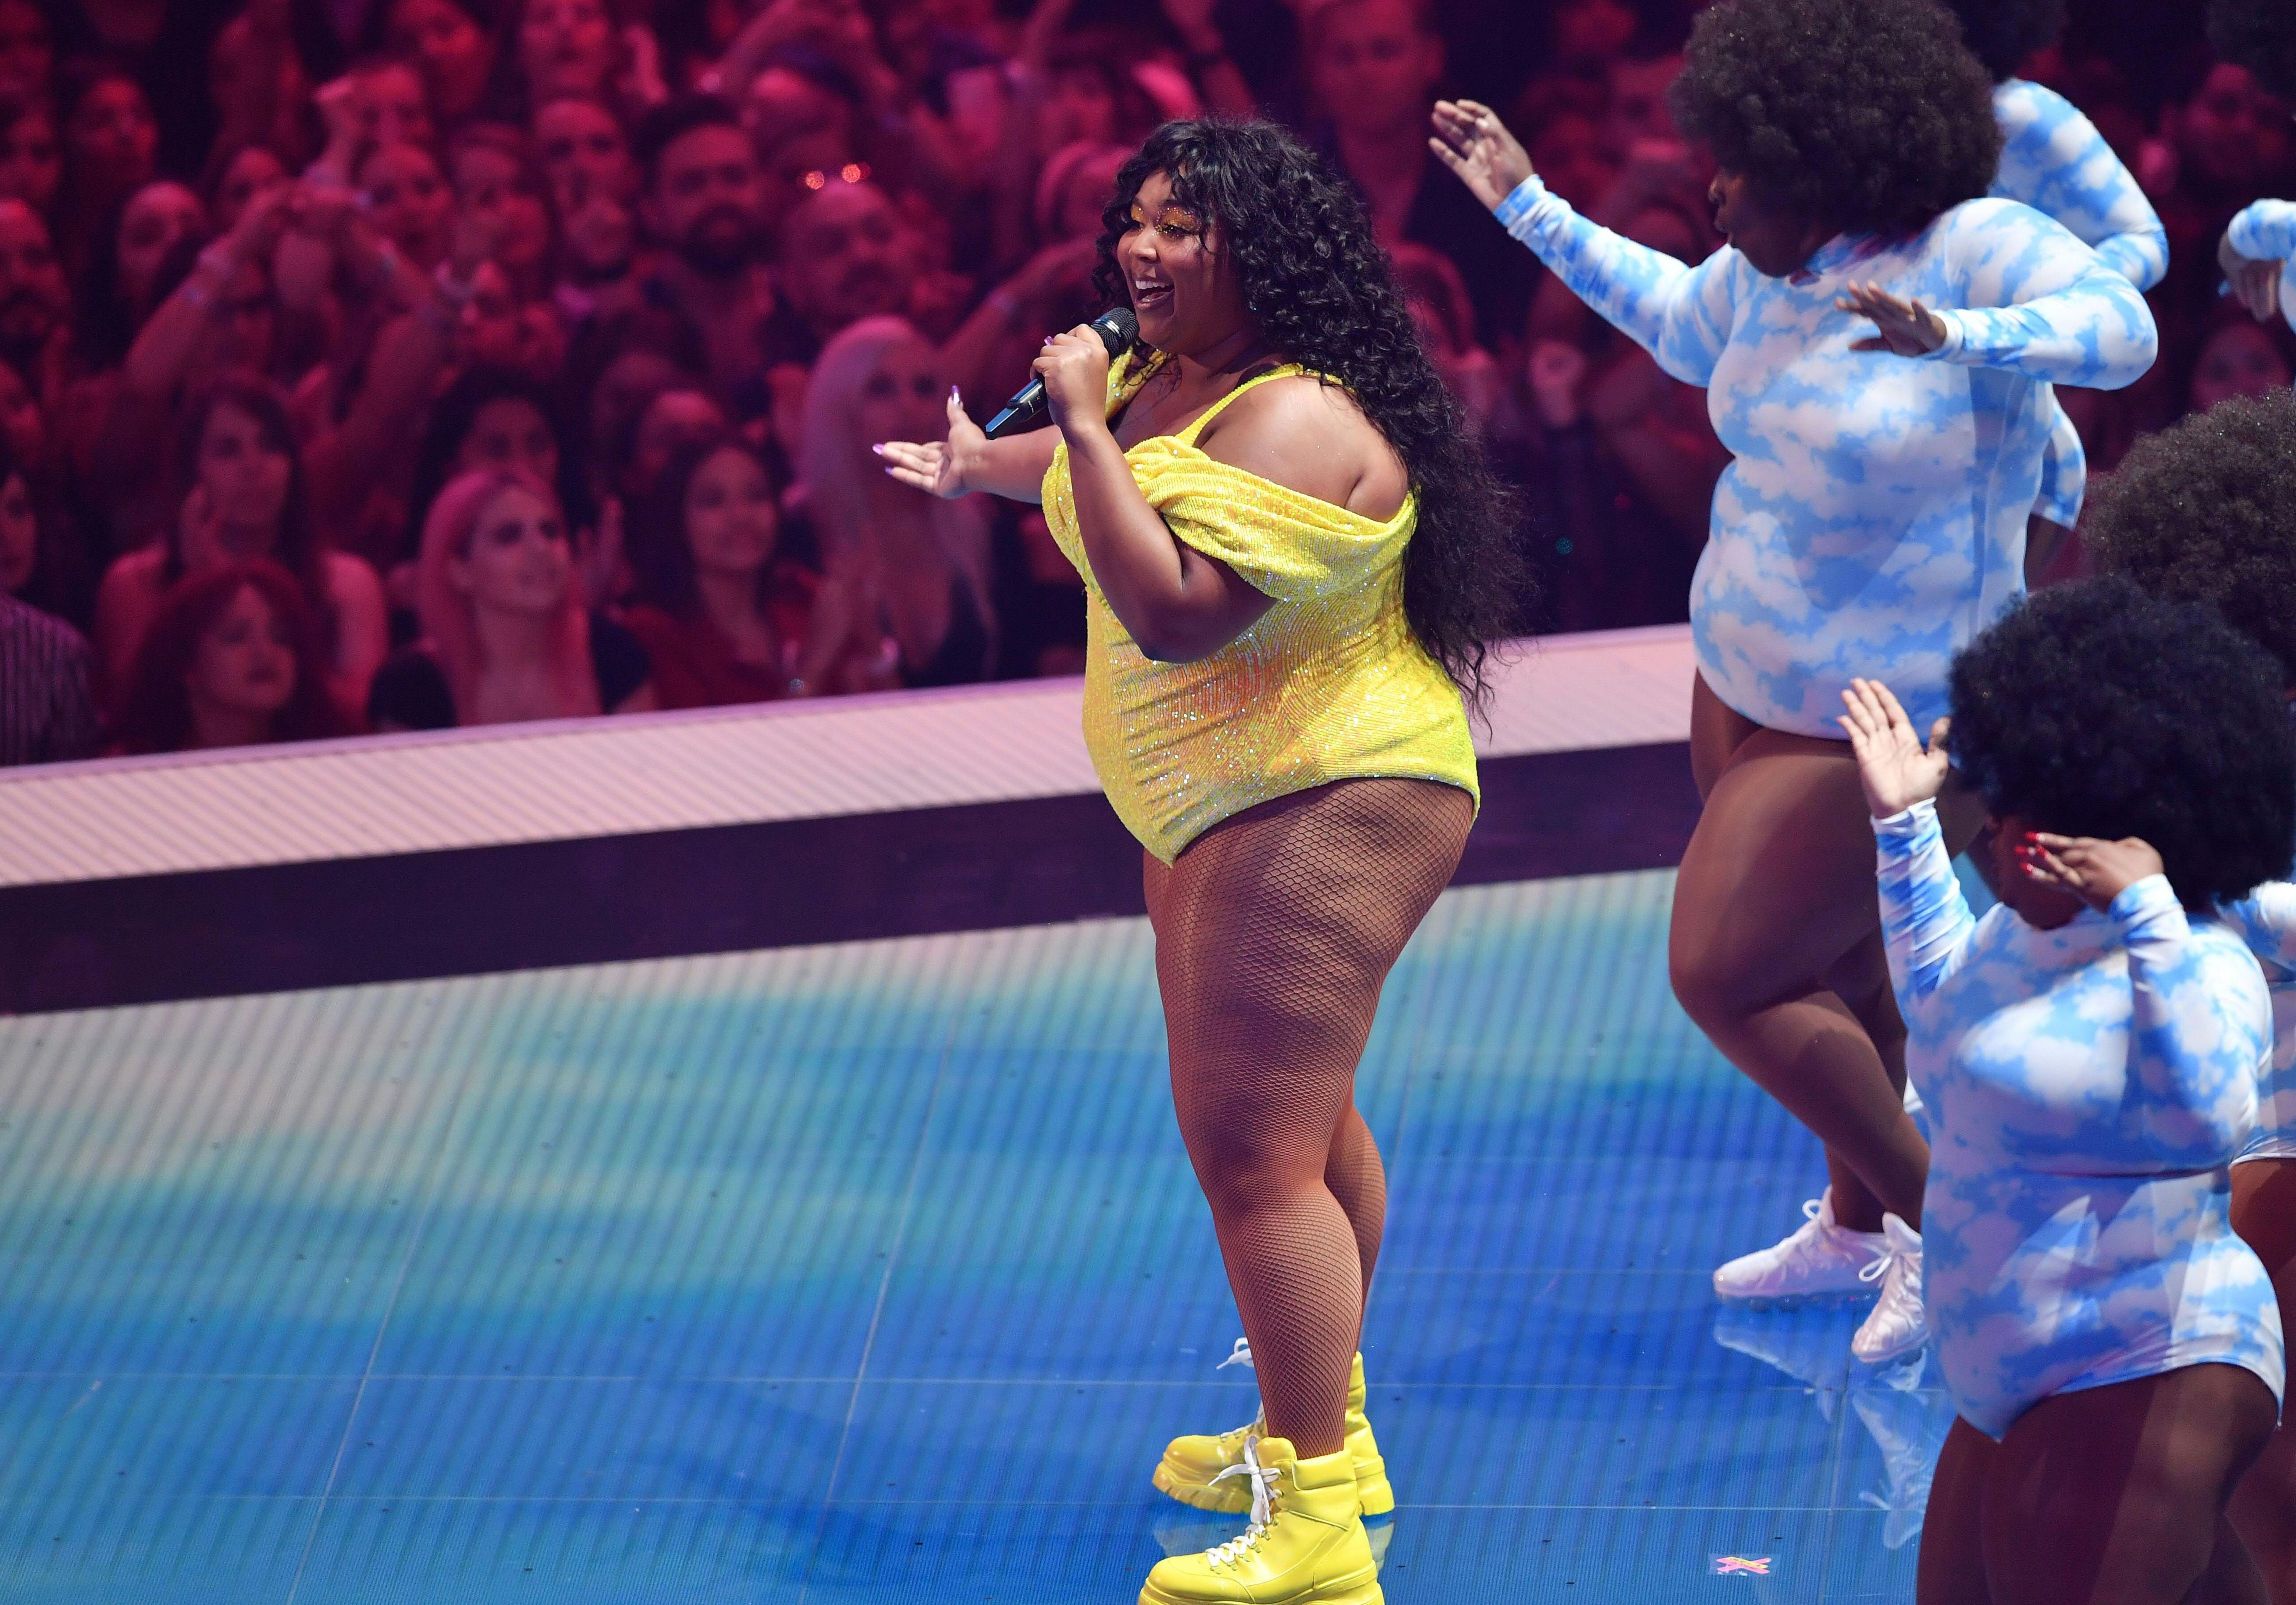 Lizzo Receives Major Love From Rihanna After She Stole The Show At The VMAs